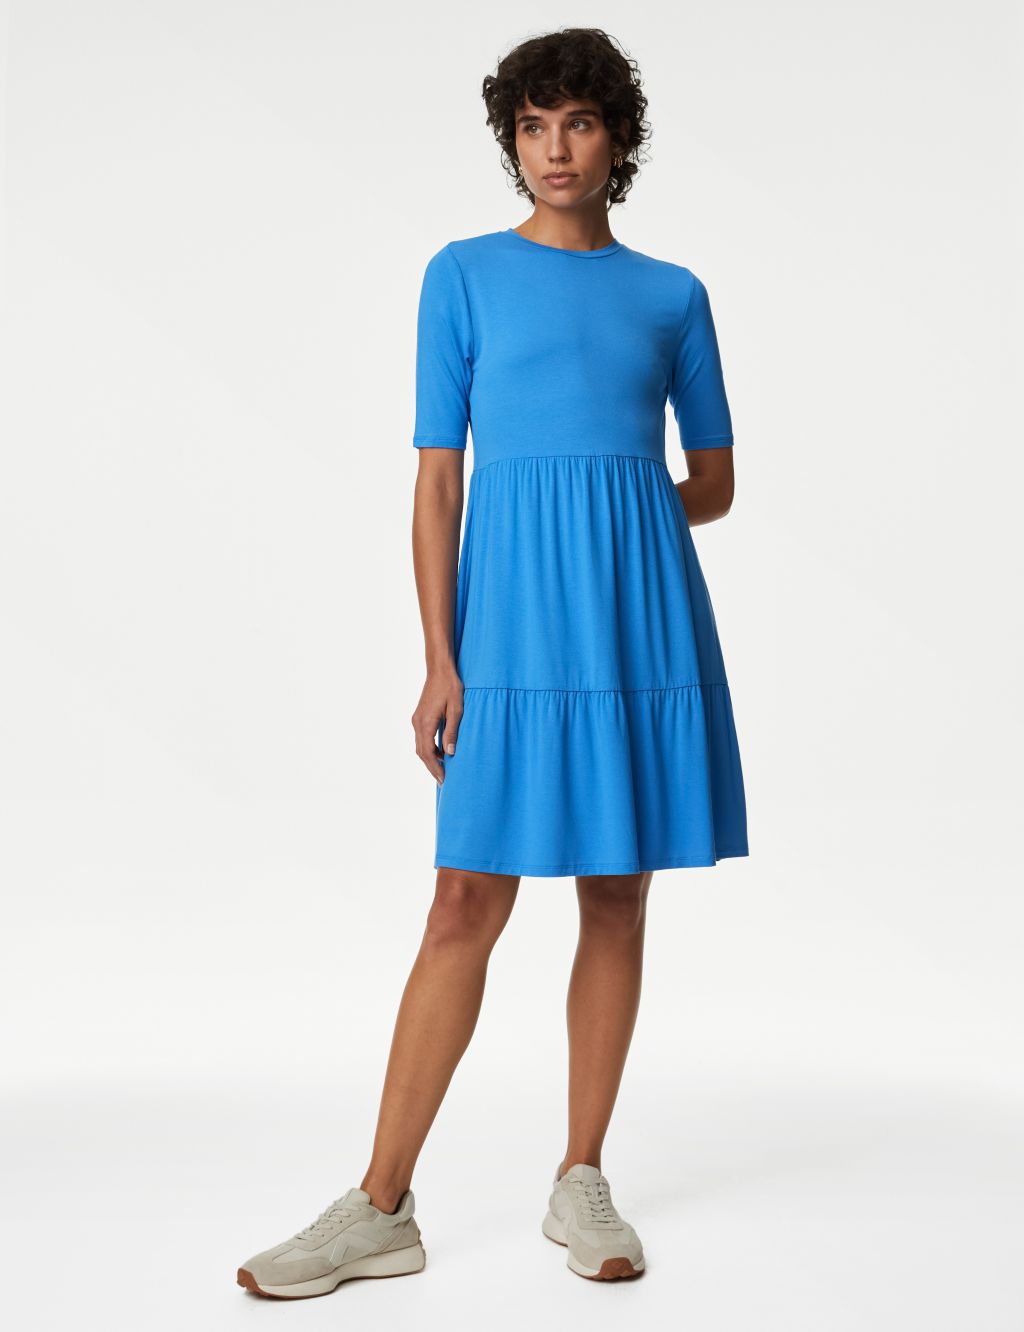 Jersey Round Neck Knee Length Tiered Dress image 4